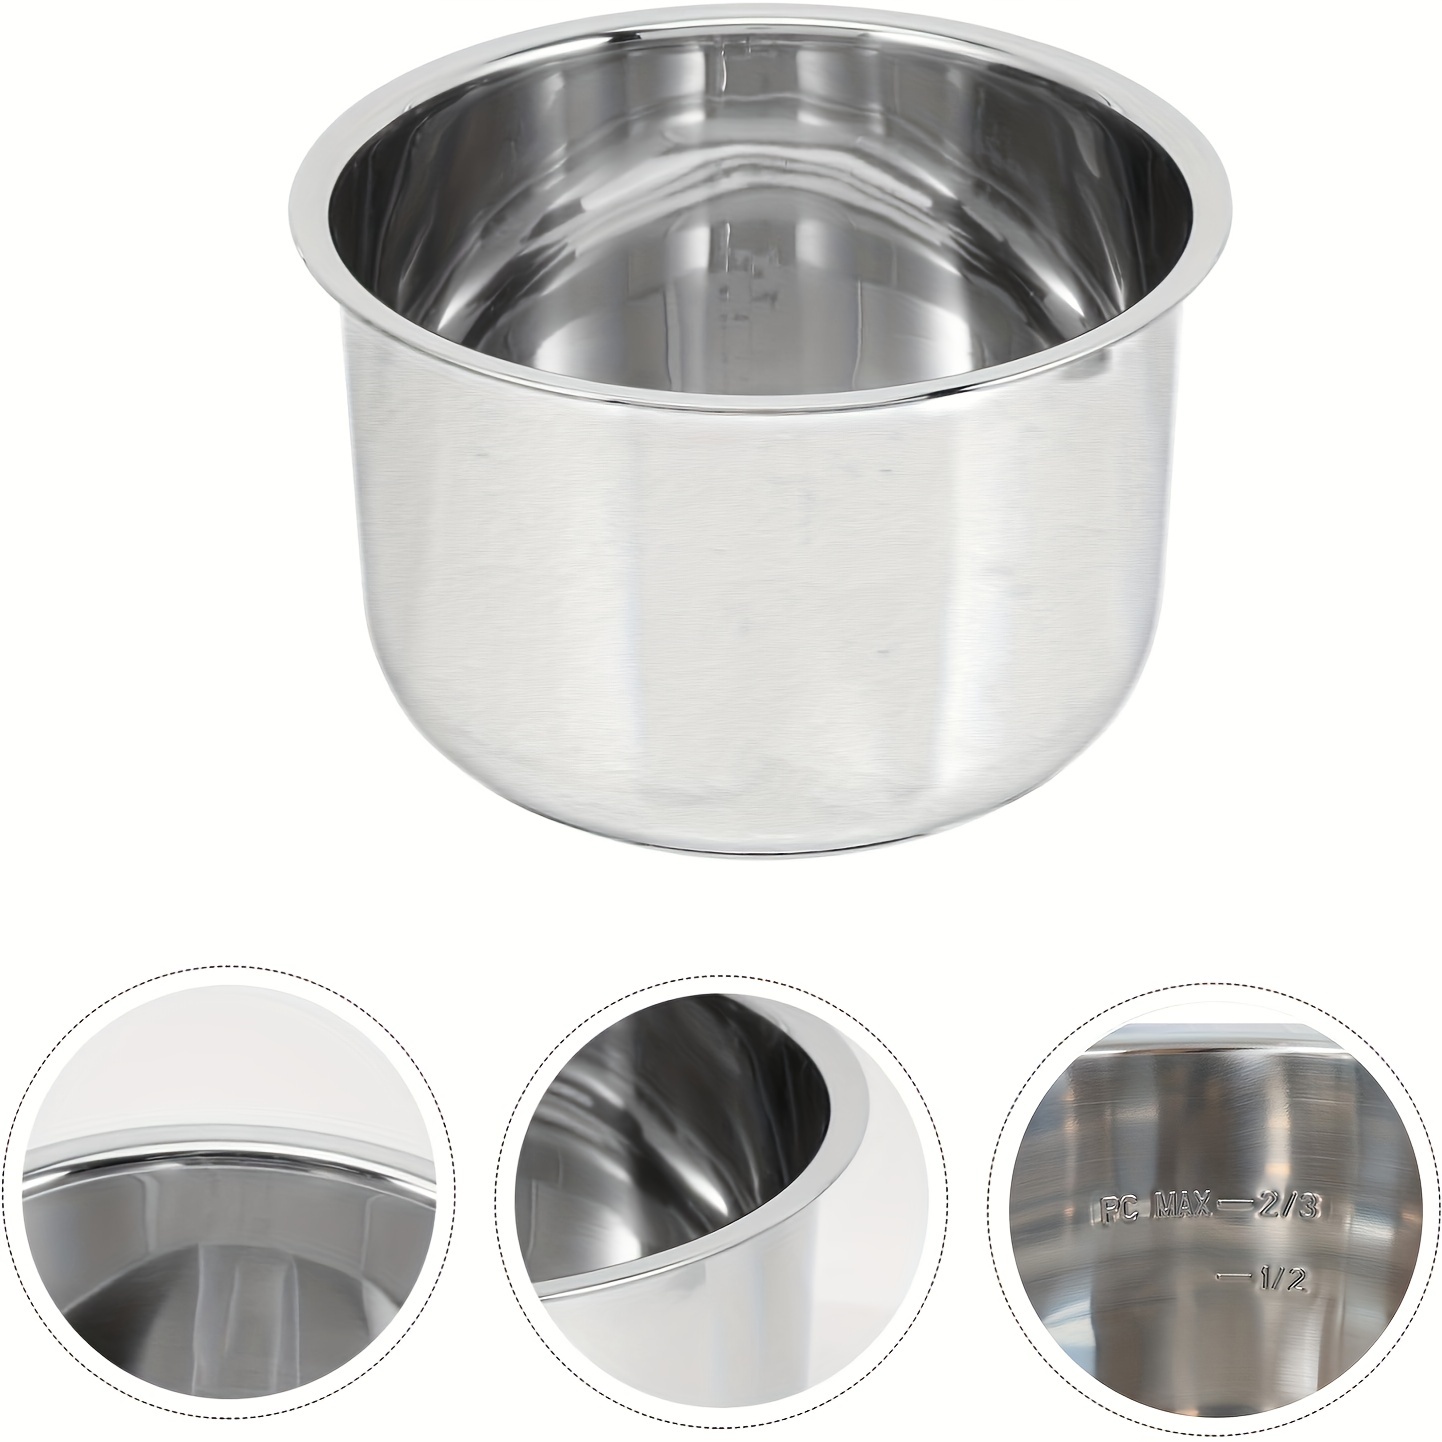  Stainless Steel Inner Pot Replacement Insert Liner